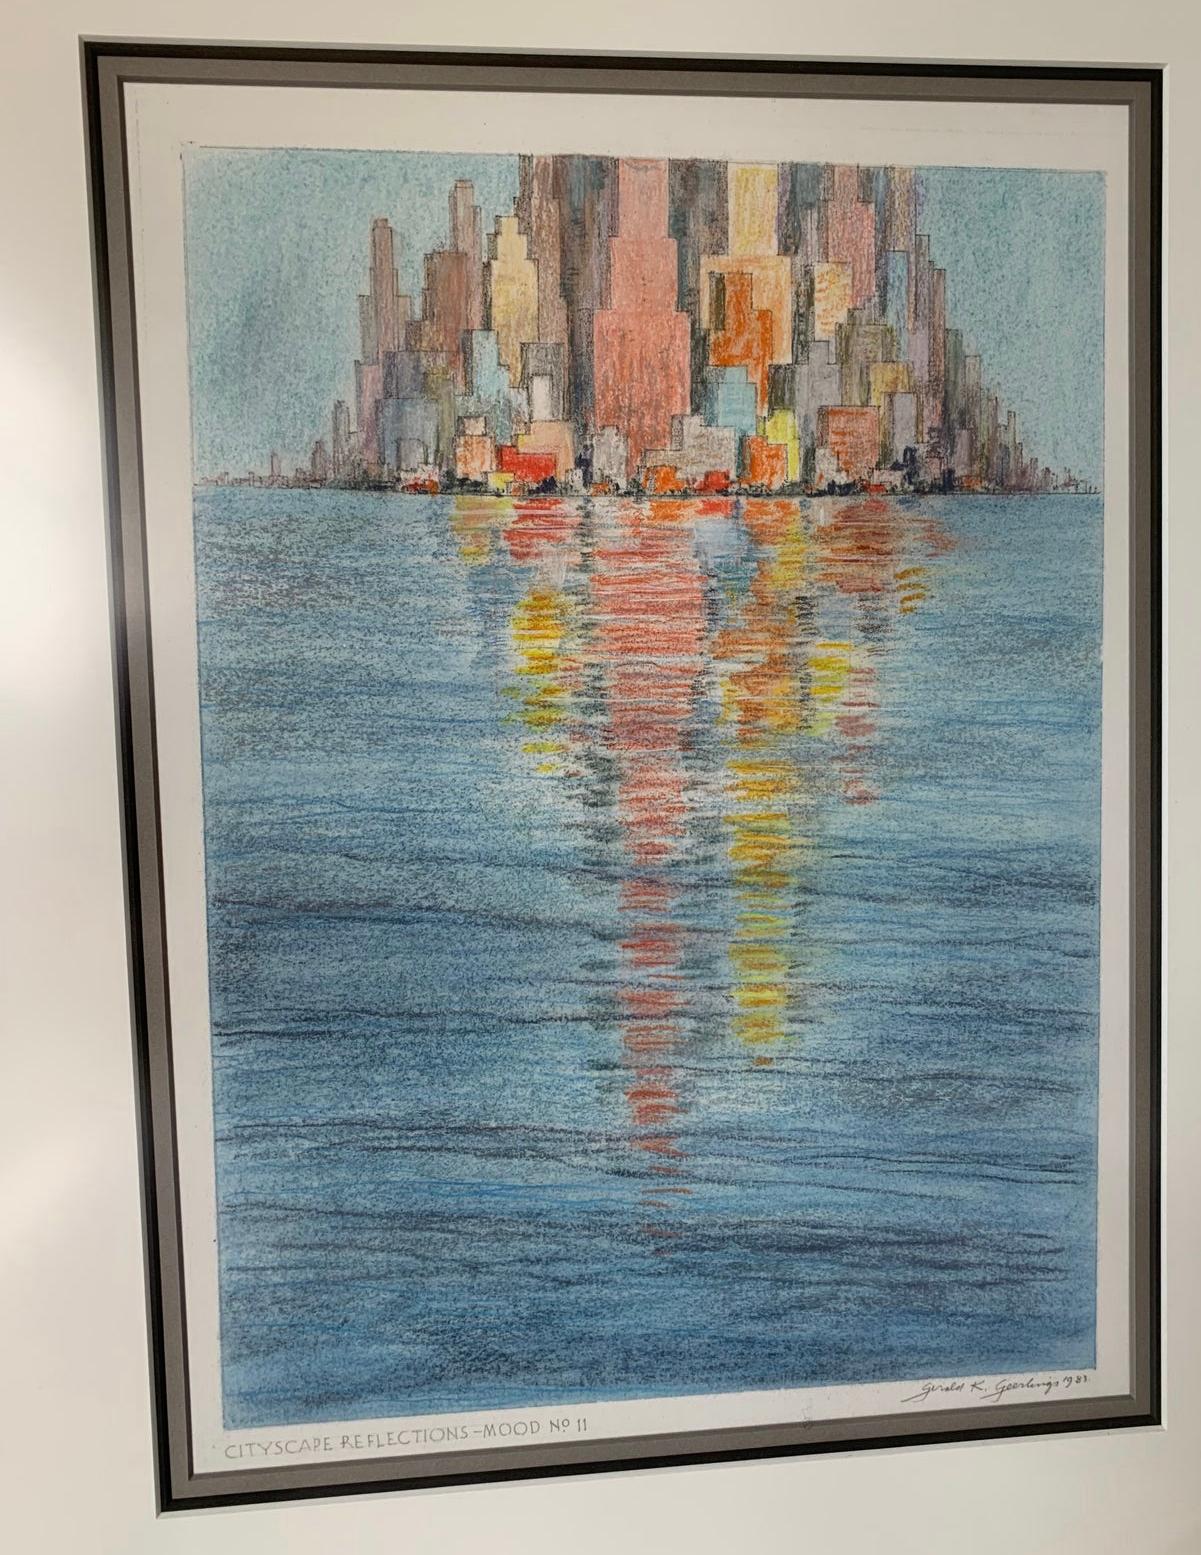 Cityscape Reflections – Mood No. 11, 1983 by Gerald K. Geerlings. Lithograph with pastel hand-coloring.
Part of a limited edition series of 40 from the series, 